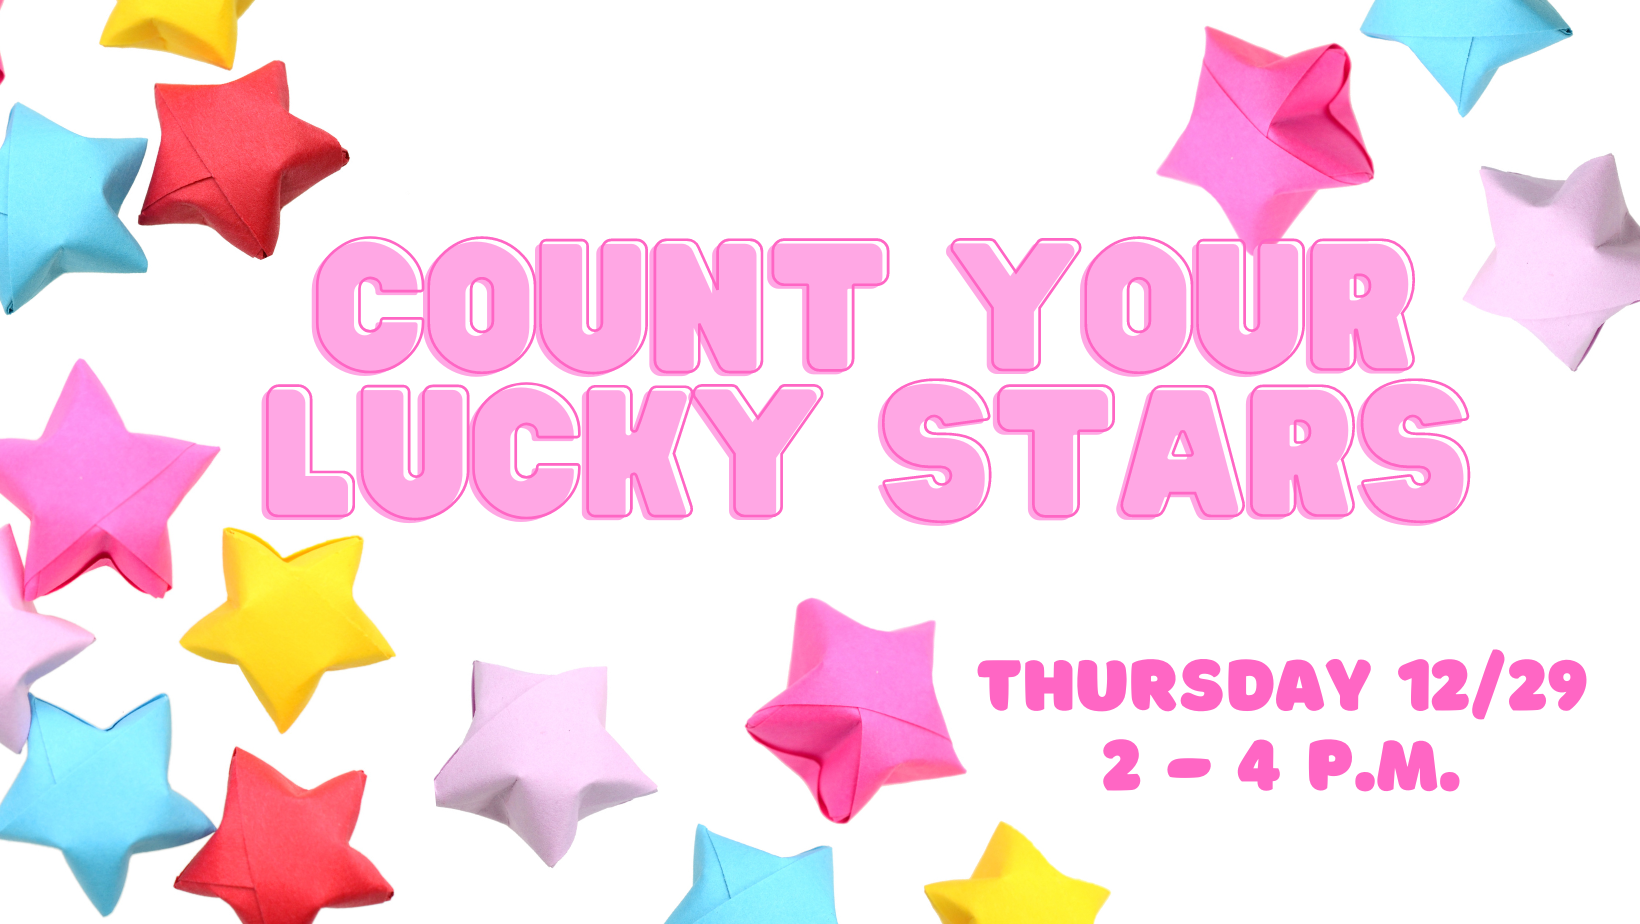 Colorful Origami stars Count Your Lucky Stars